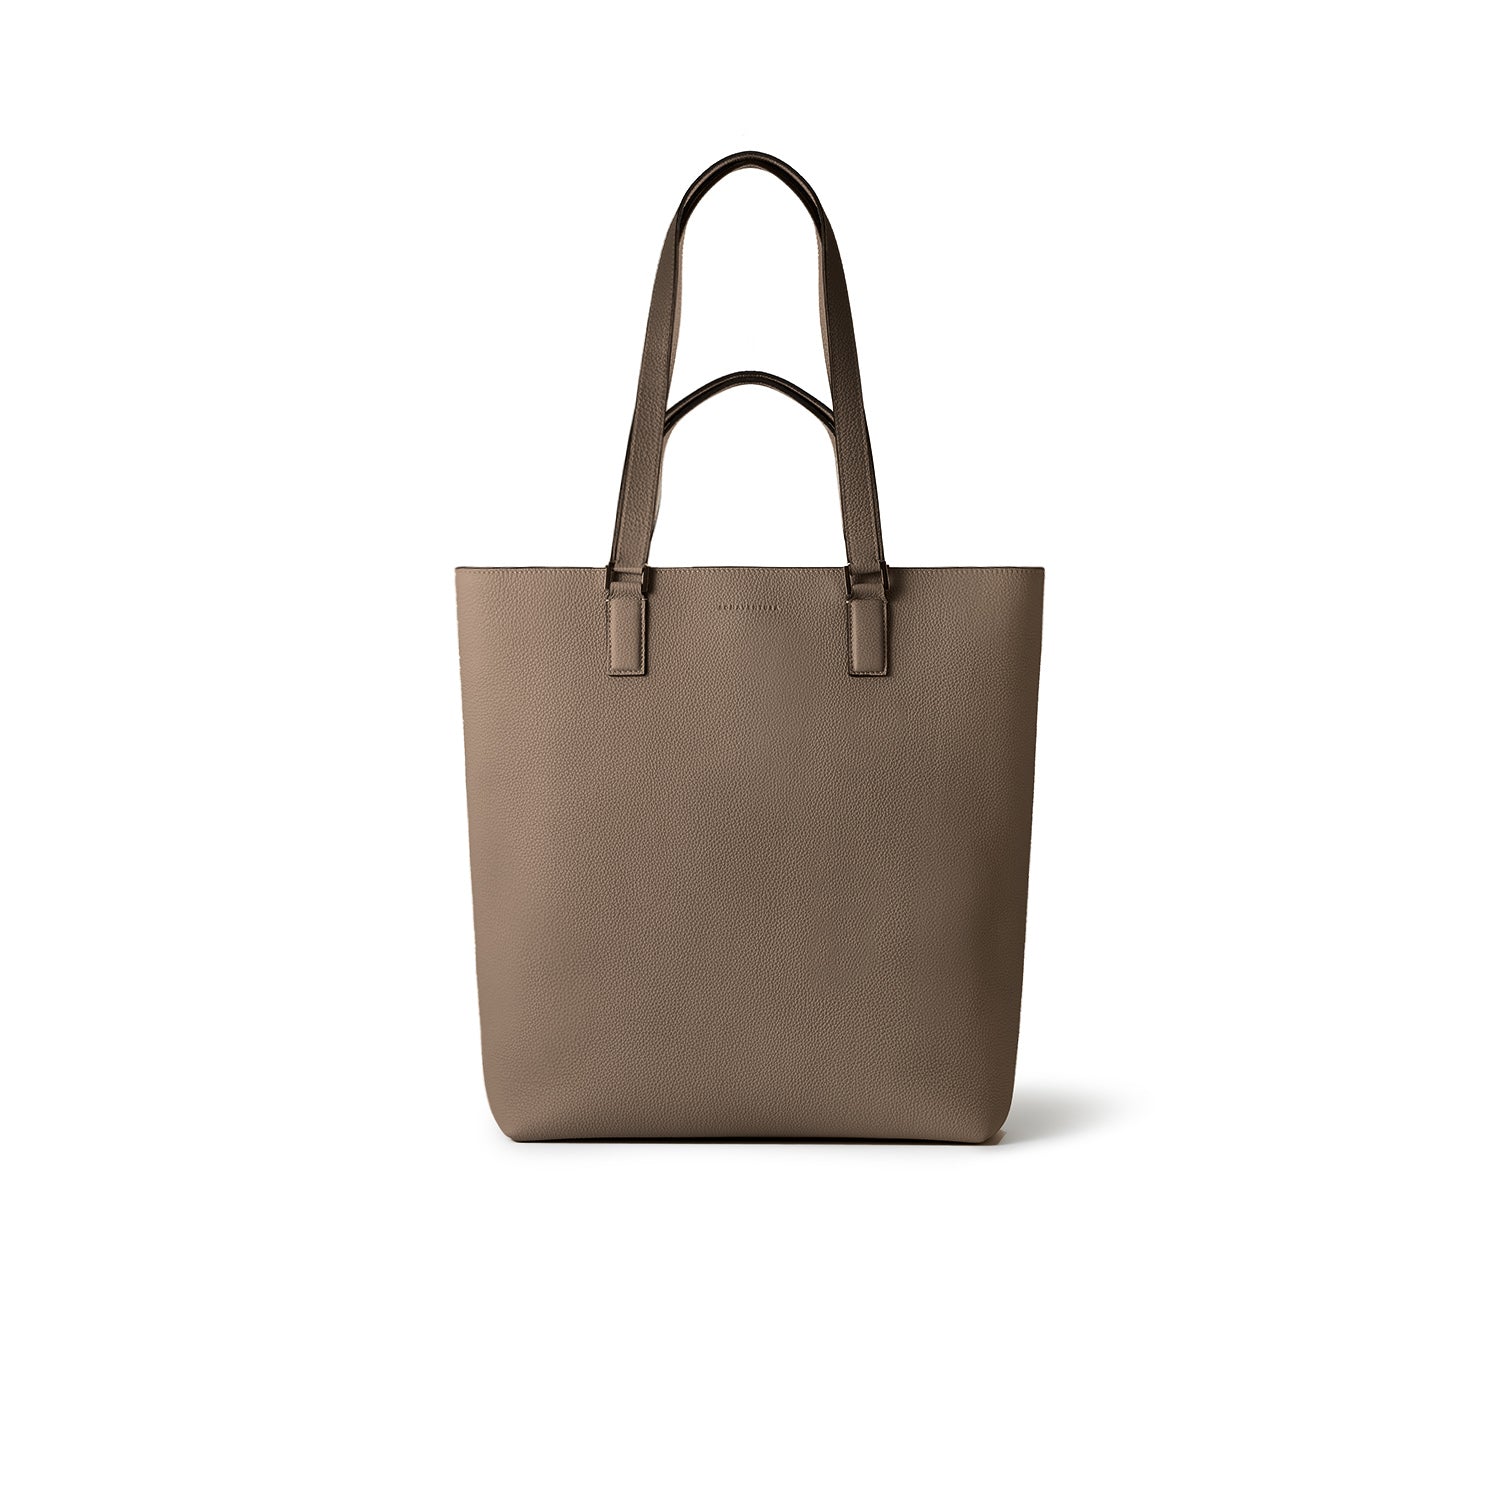 Cleo Tote Bag in Shrink Leather Etoupe